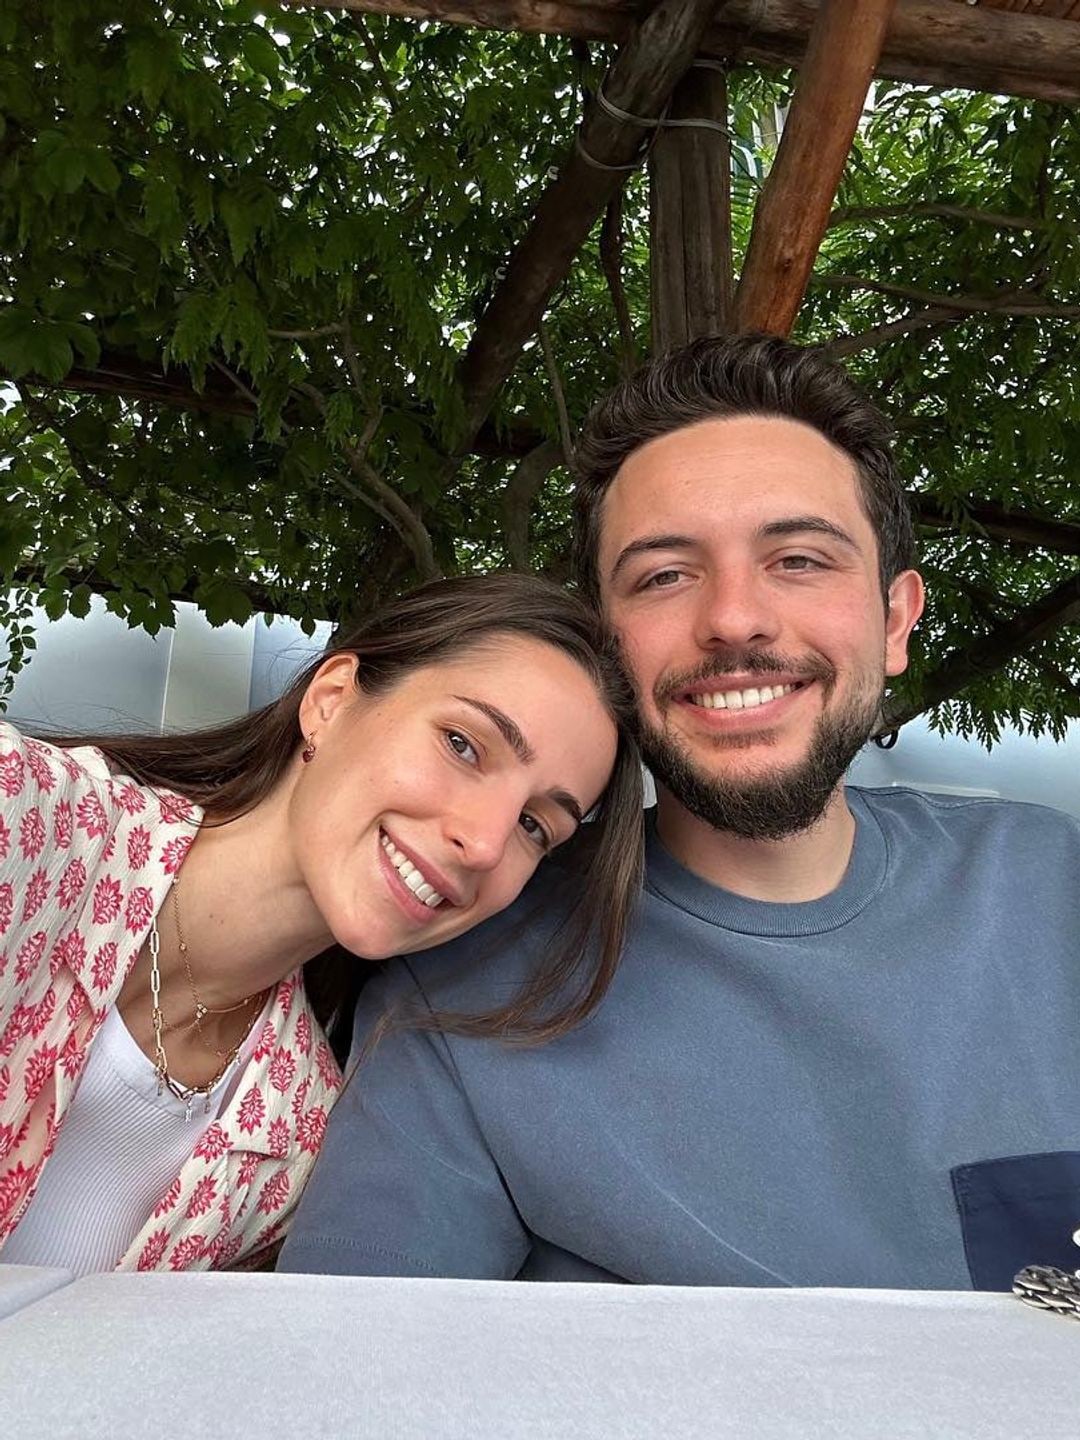 Princess Rjwa and His Royal Highness Crown Prince Al Hussein pose for a selfie. Rajwa wears a cream and pink shirt where Hussein wears a blue t-shirt 